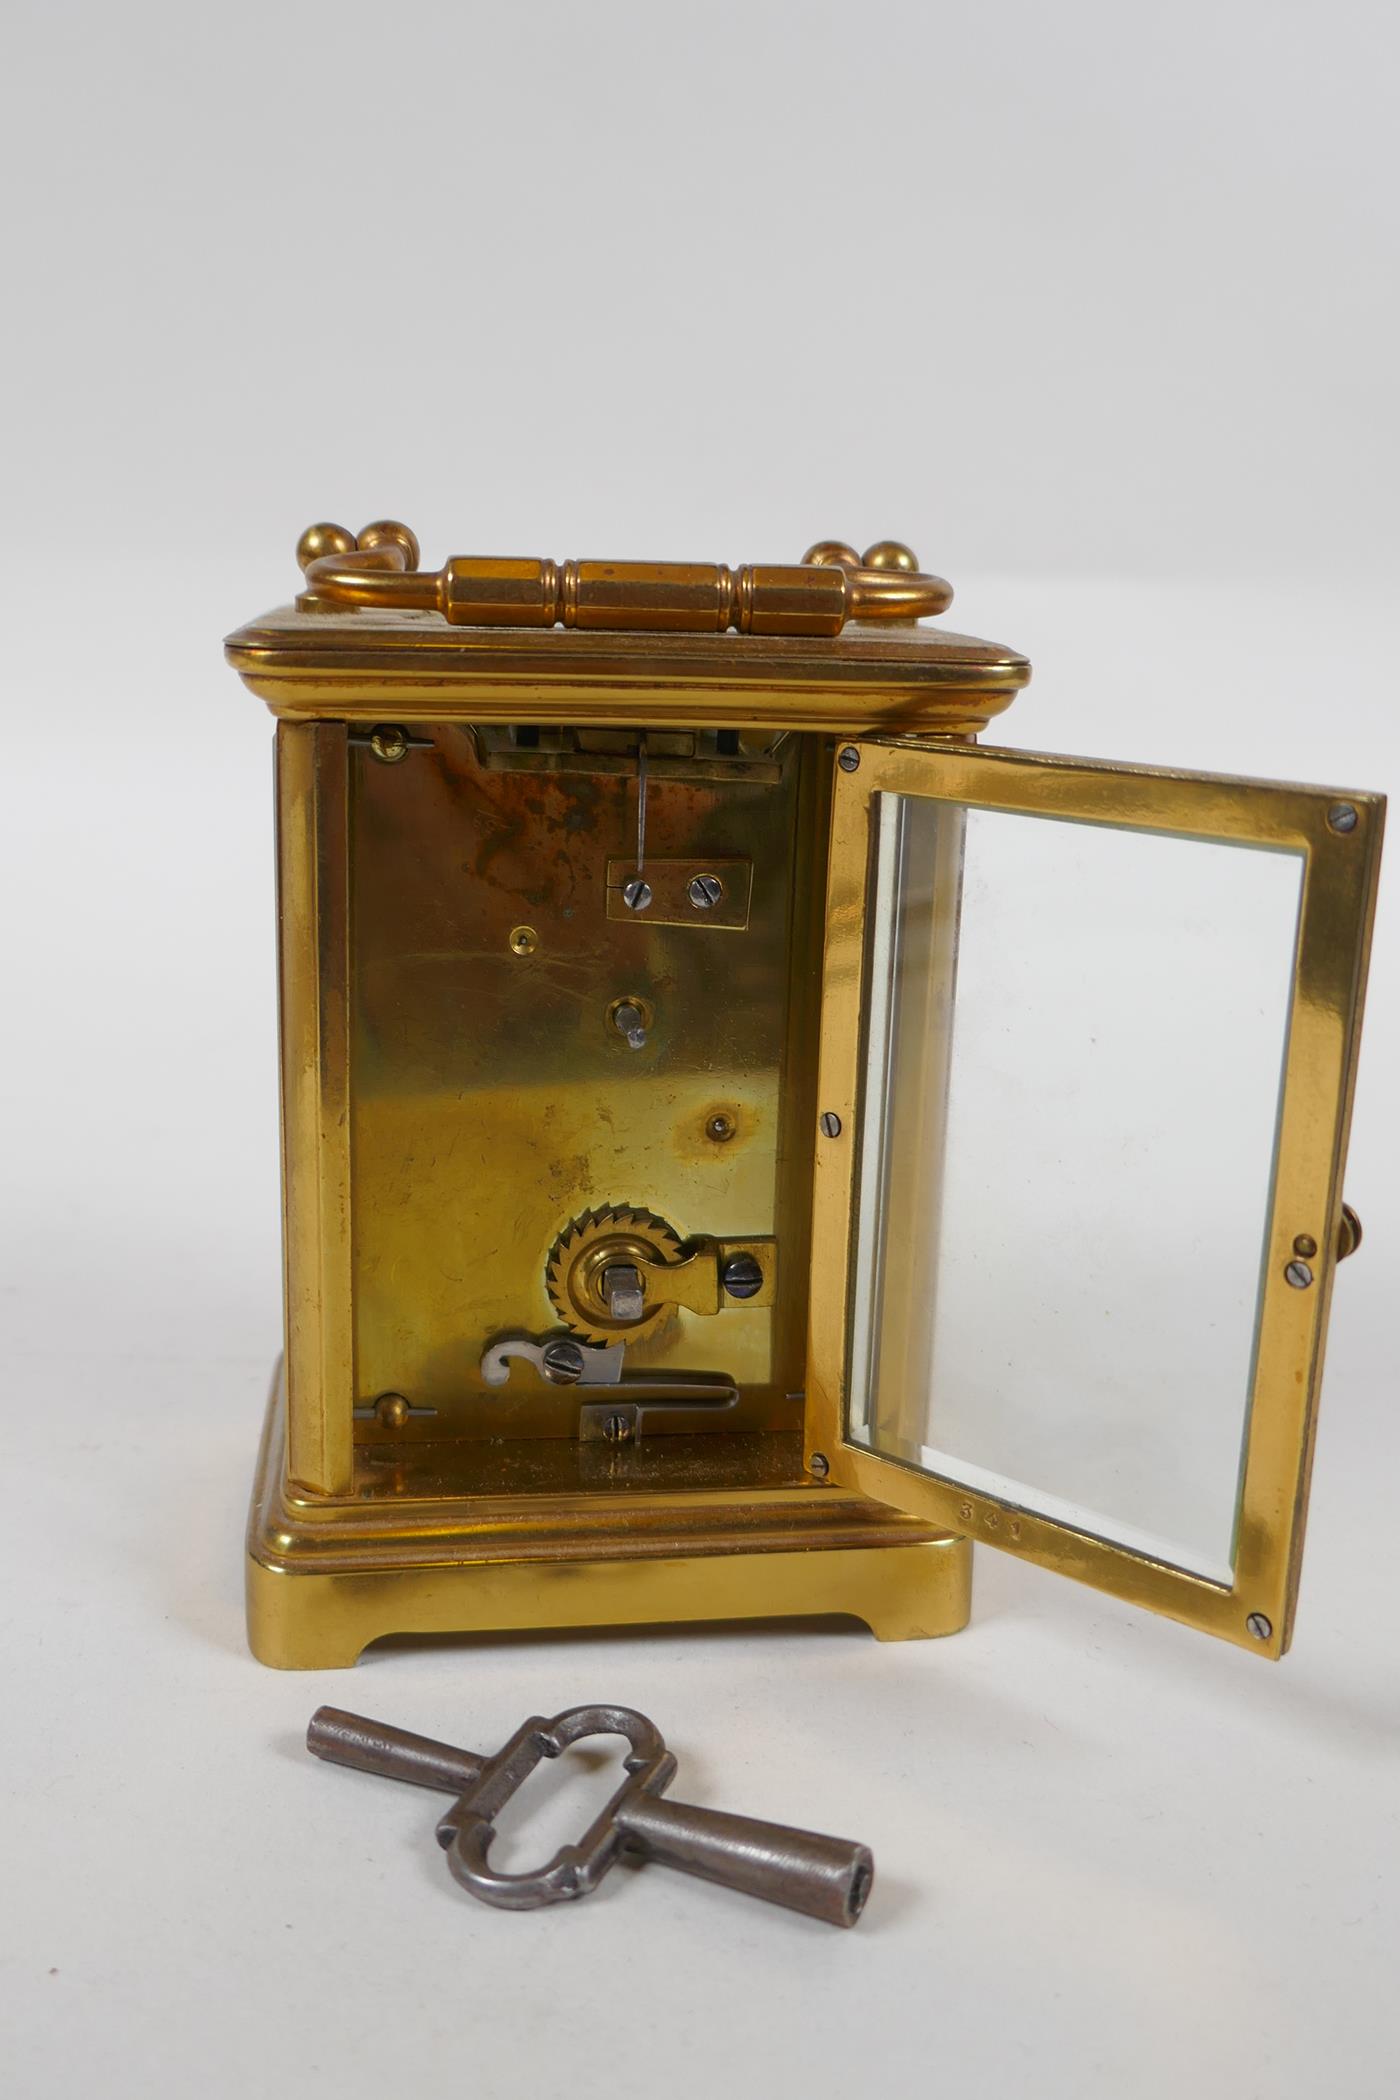 A brass cased carriage clock, the enamel dial with Roman numerals, 8 x 6cm, 11cm high - Image 3 of 4